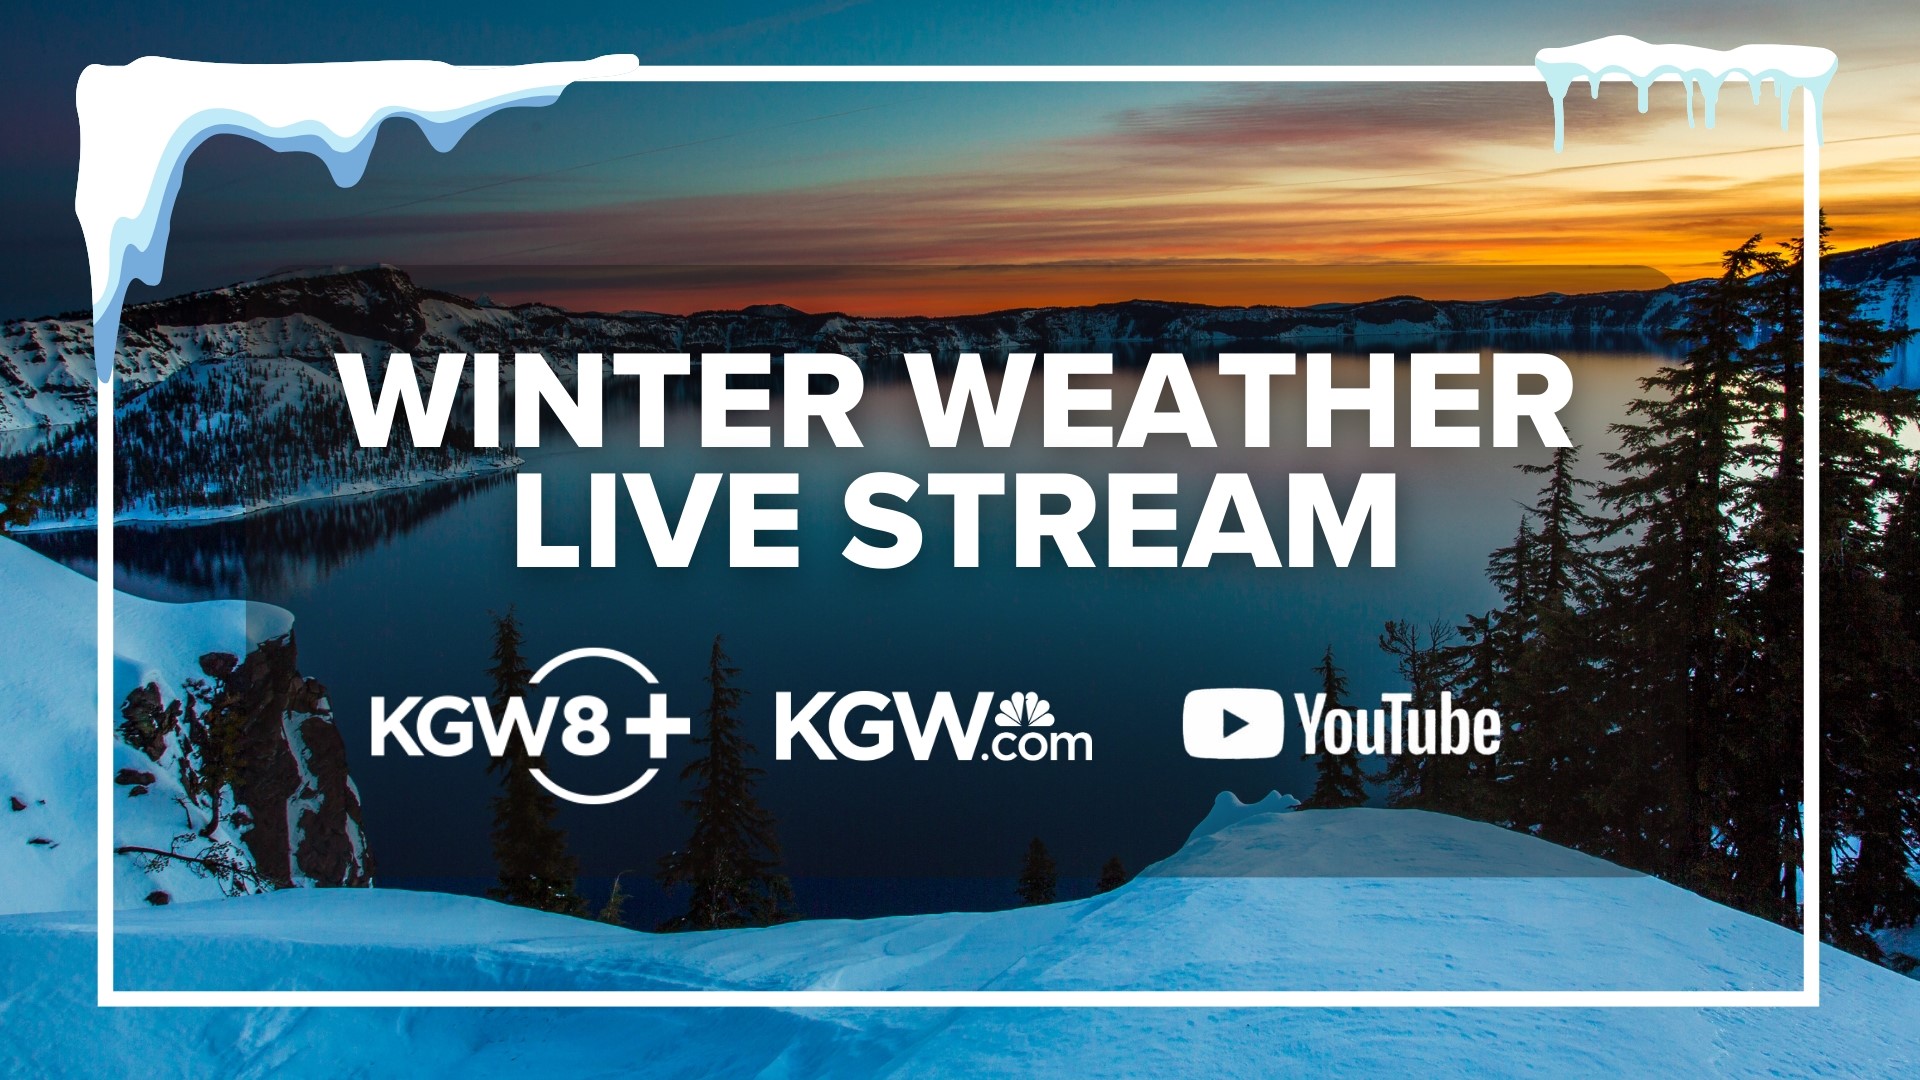 A winter storm will hit the Portland metro area this weekend. KGW meteorologists Rod Hill and Chris McGinness are here to let you know what to expect.